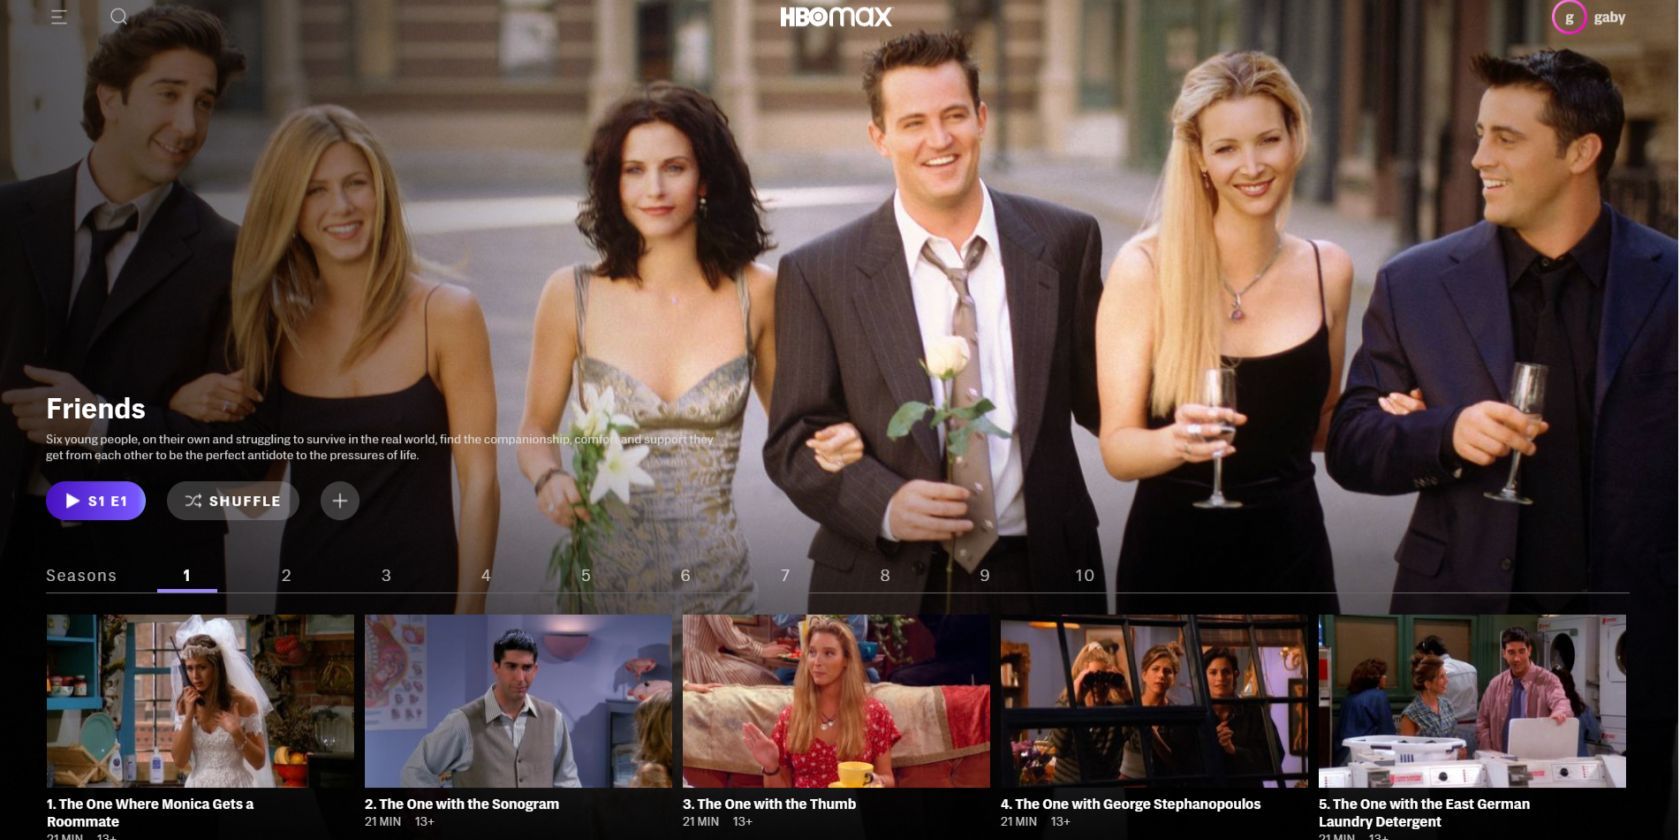 HBO Max Shuffle Button on Friends page